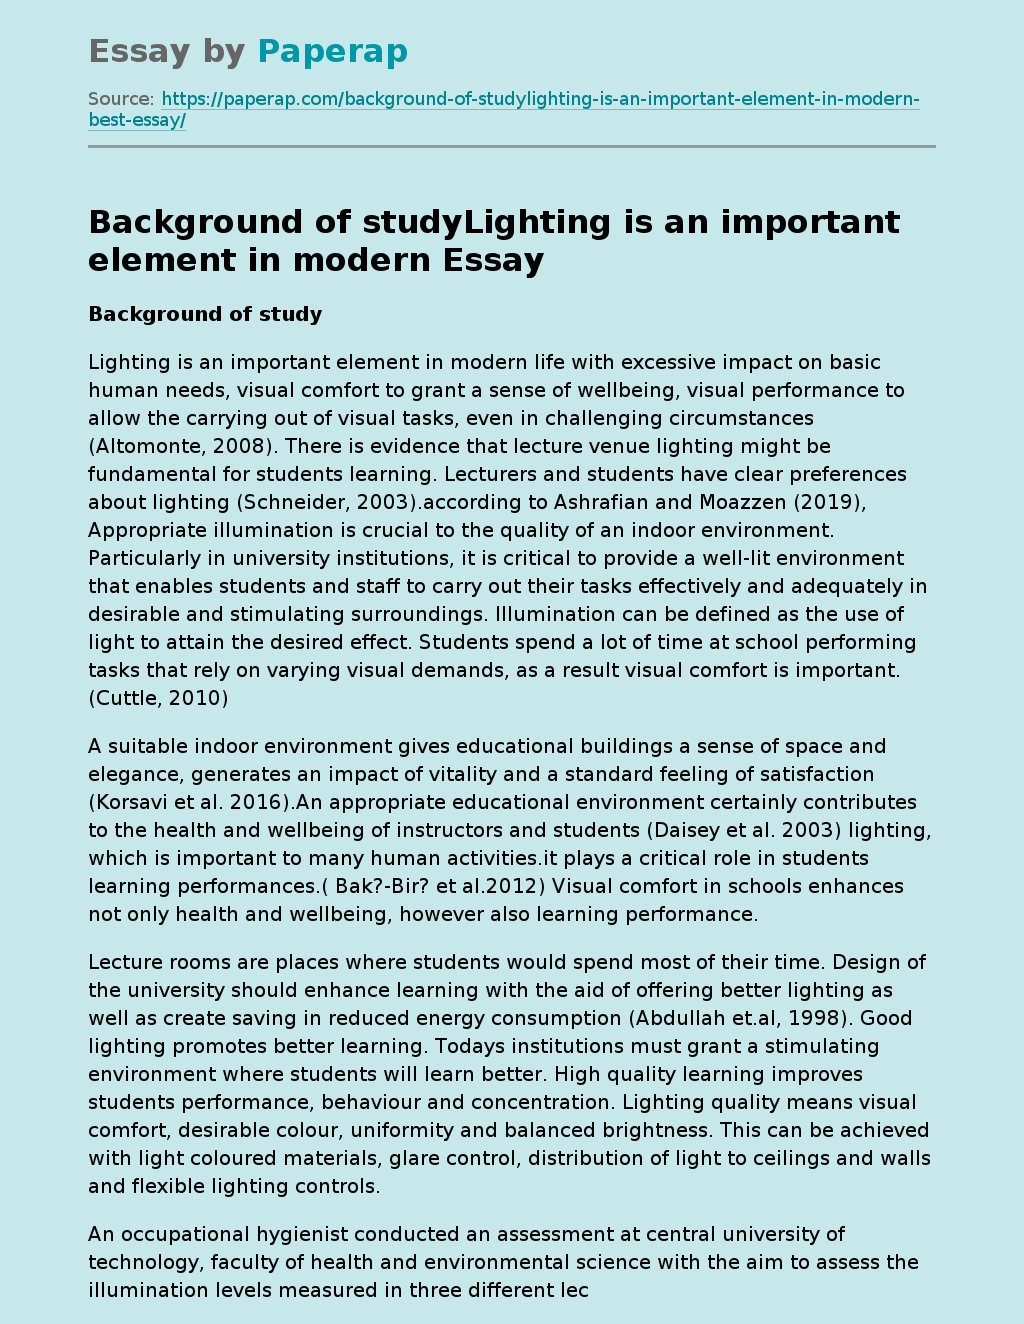 Background of studyLighting is an important element in modern